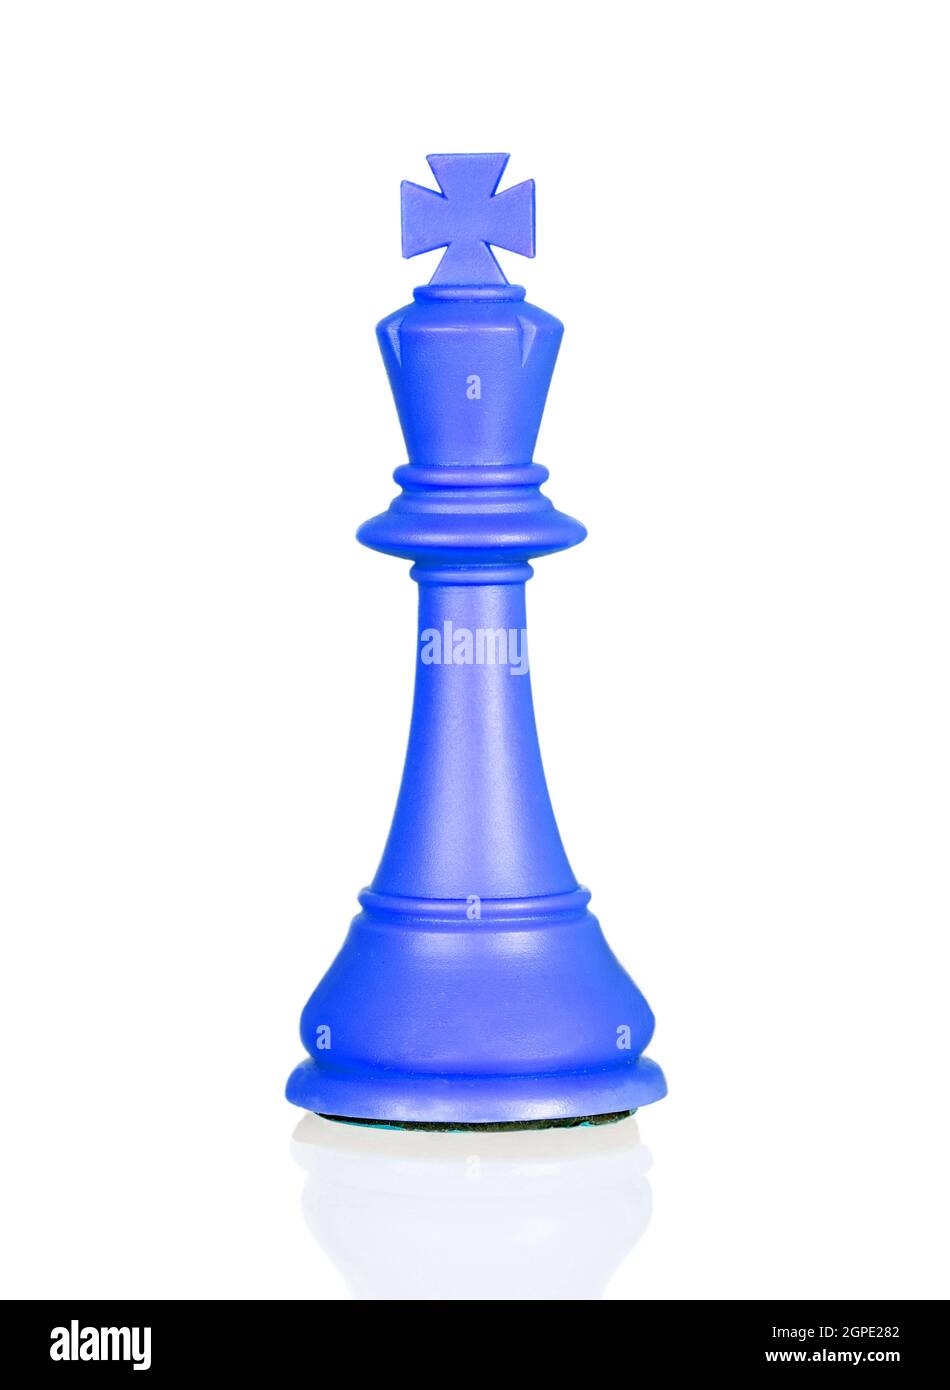 Blue chess piece king isolated on a white background Stock Photo